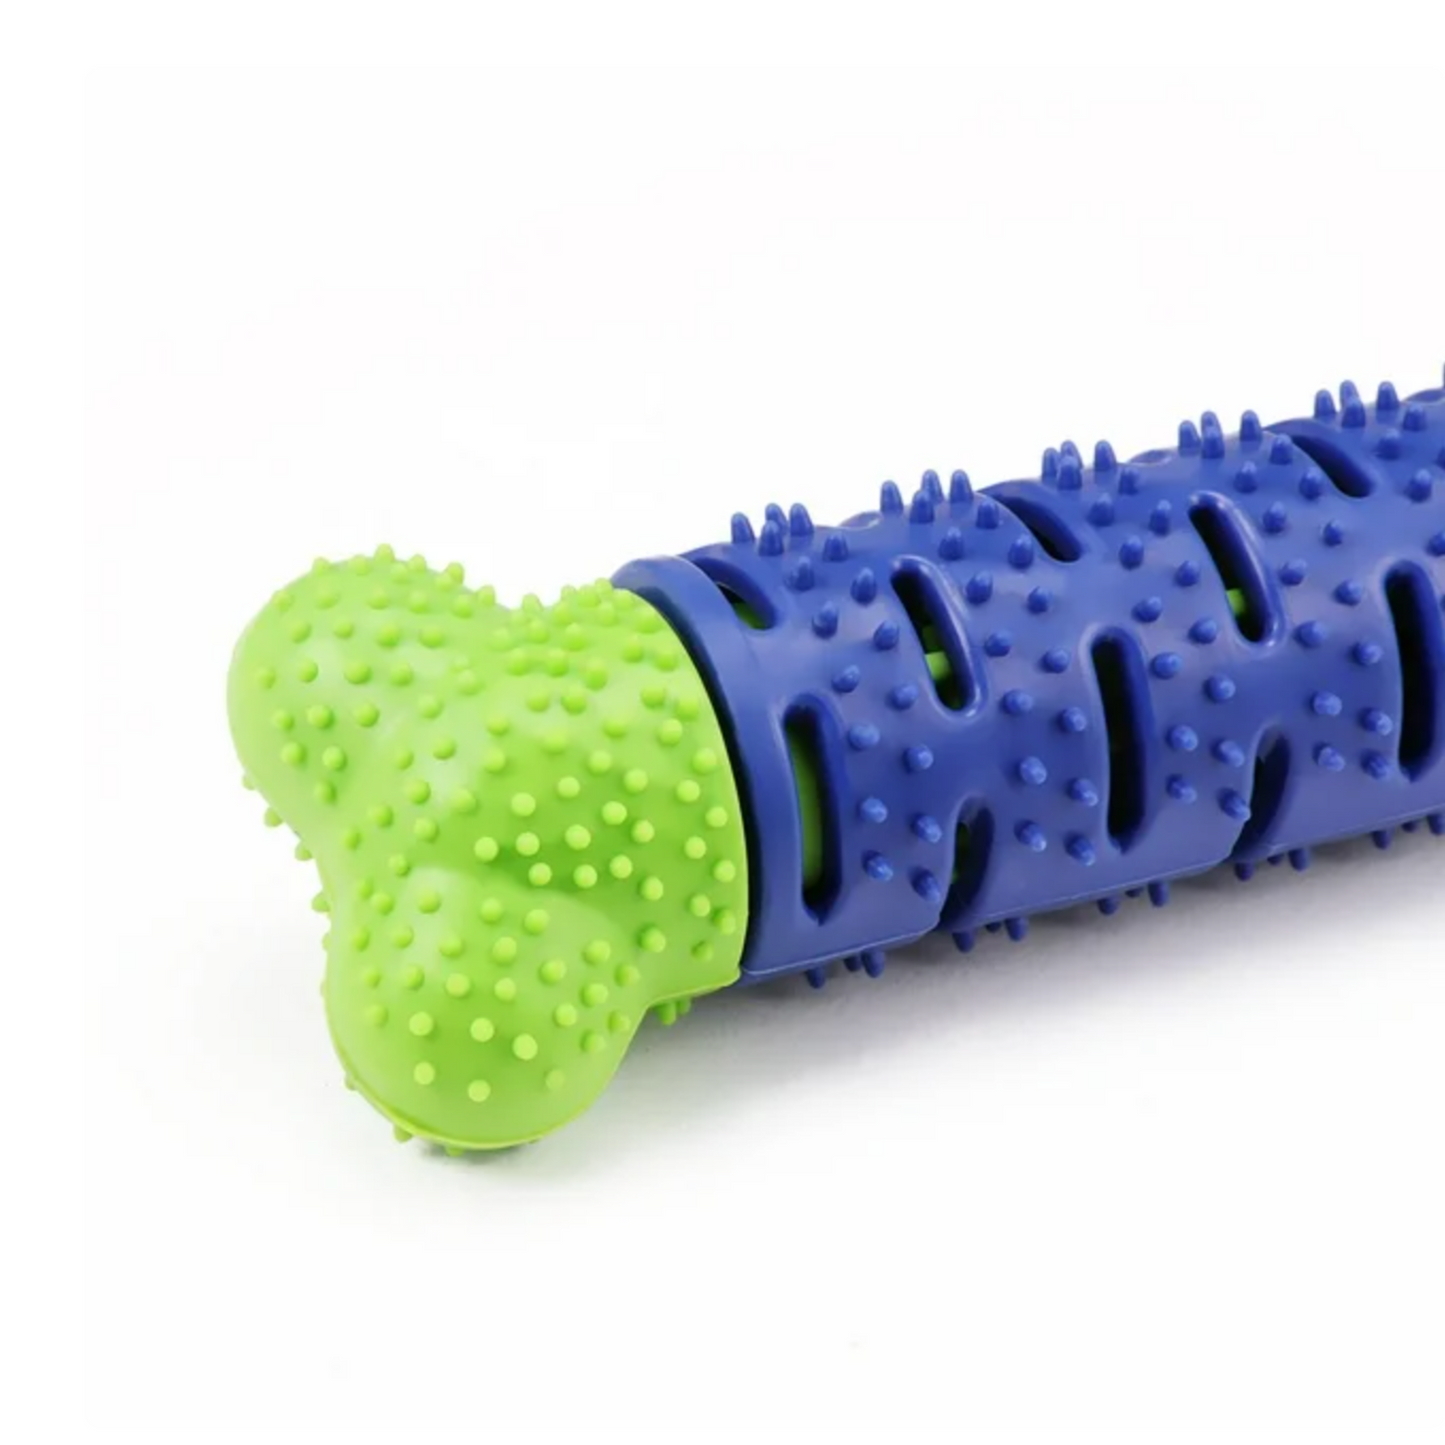 Buy One And Get One FREE: Self-Brushing Dog Toothbrush Toy